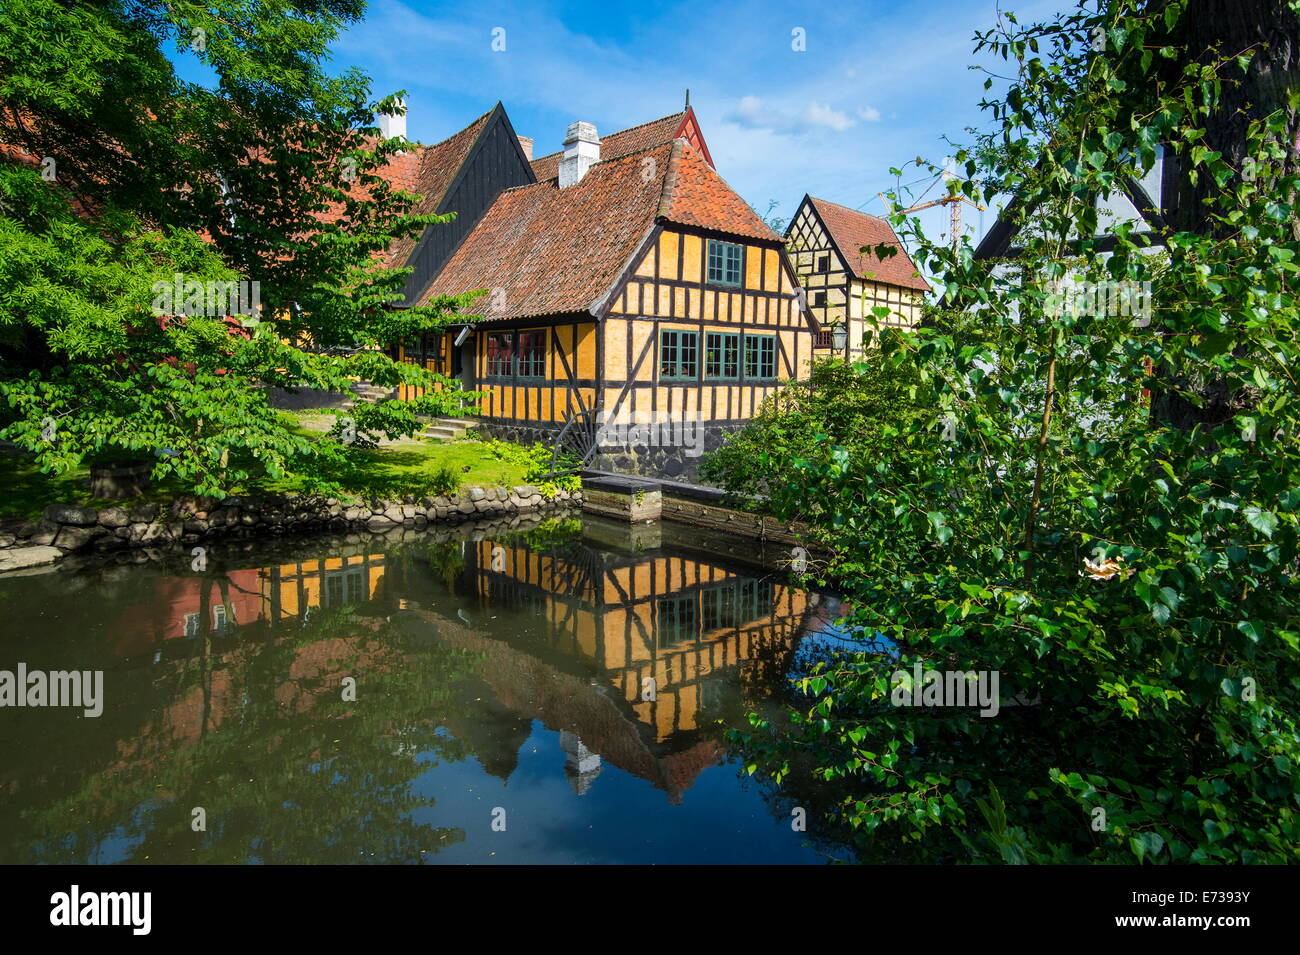 Little pond in the Old Town, Den Gamle By, open air museum in Aarhus, Denmark, Scandinavia, Europe Stock Photo